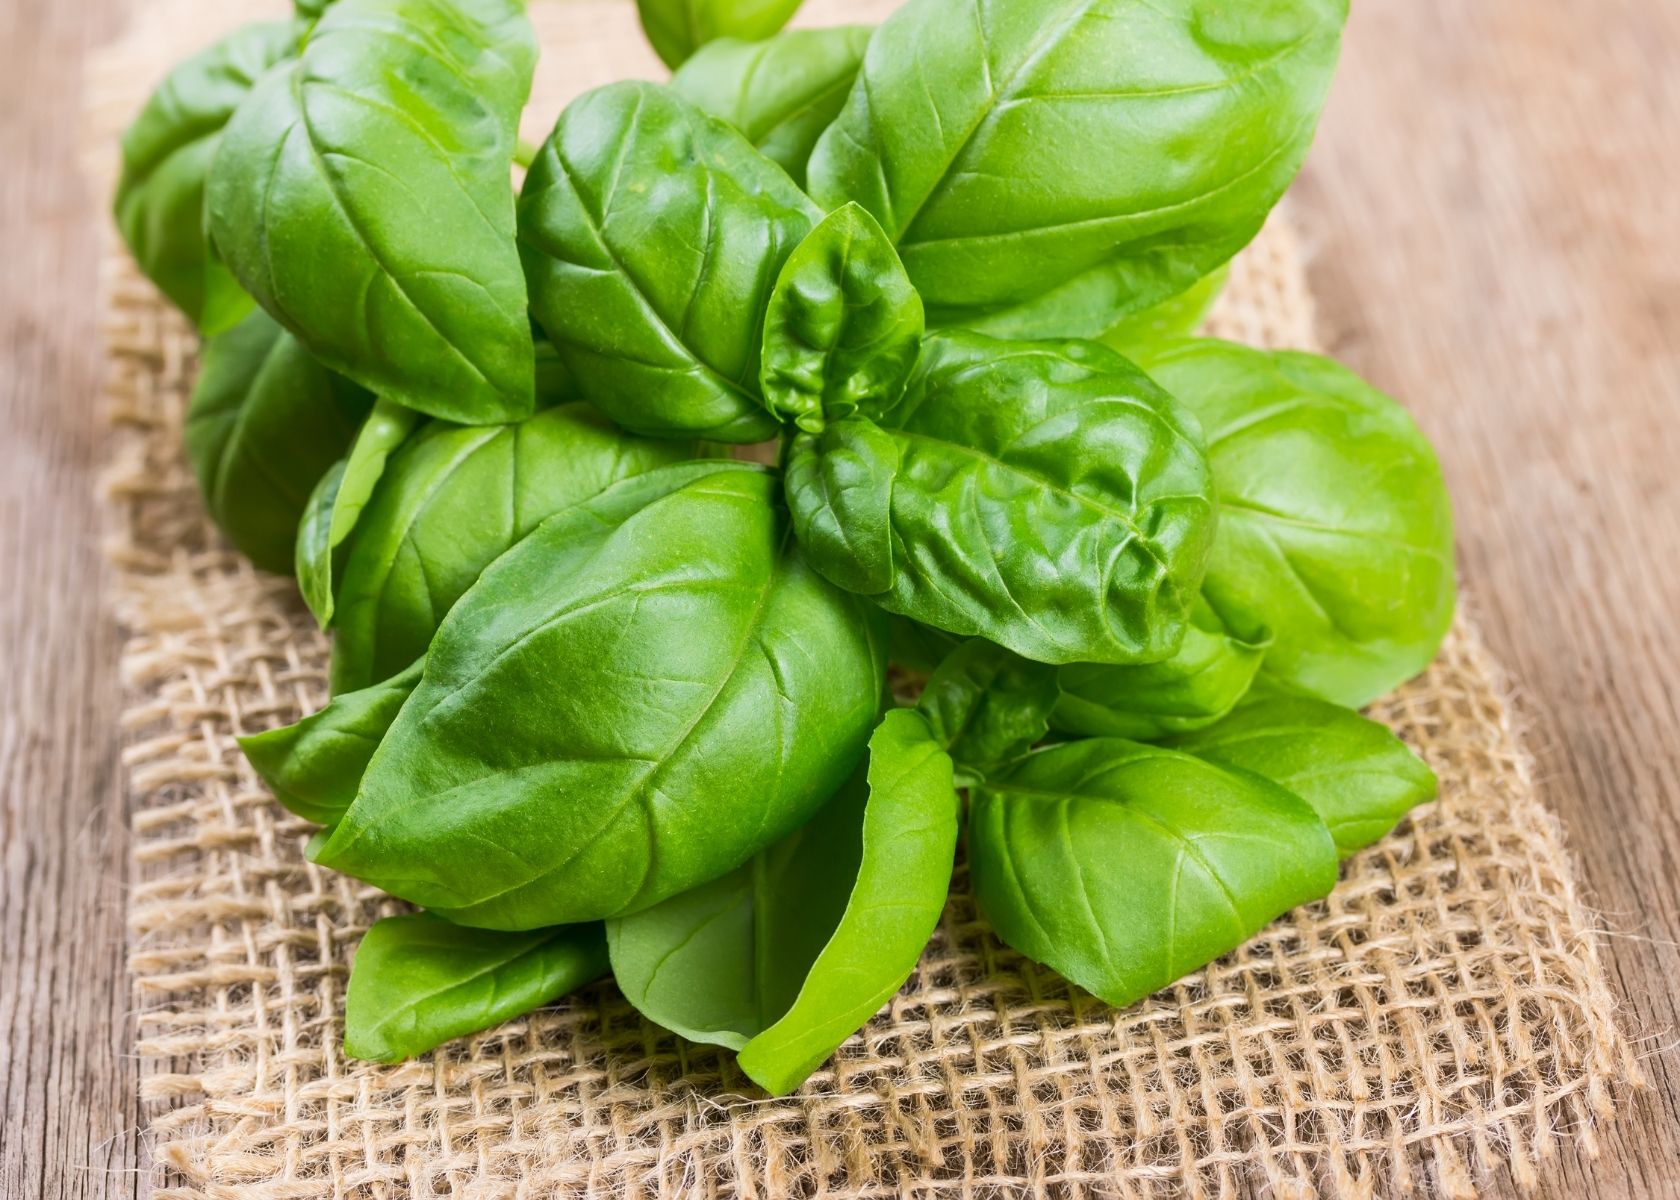 Large bunch of fresh basil on a piece of burlap over wooden table.